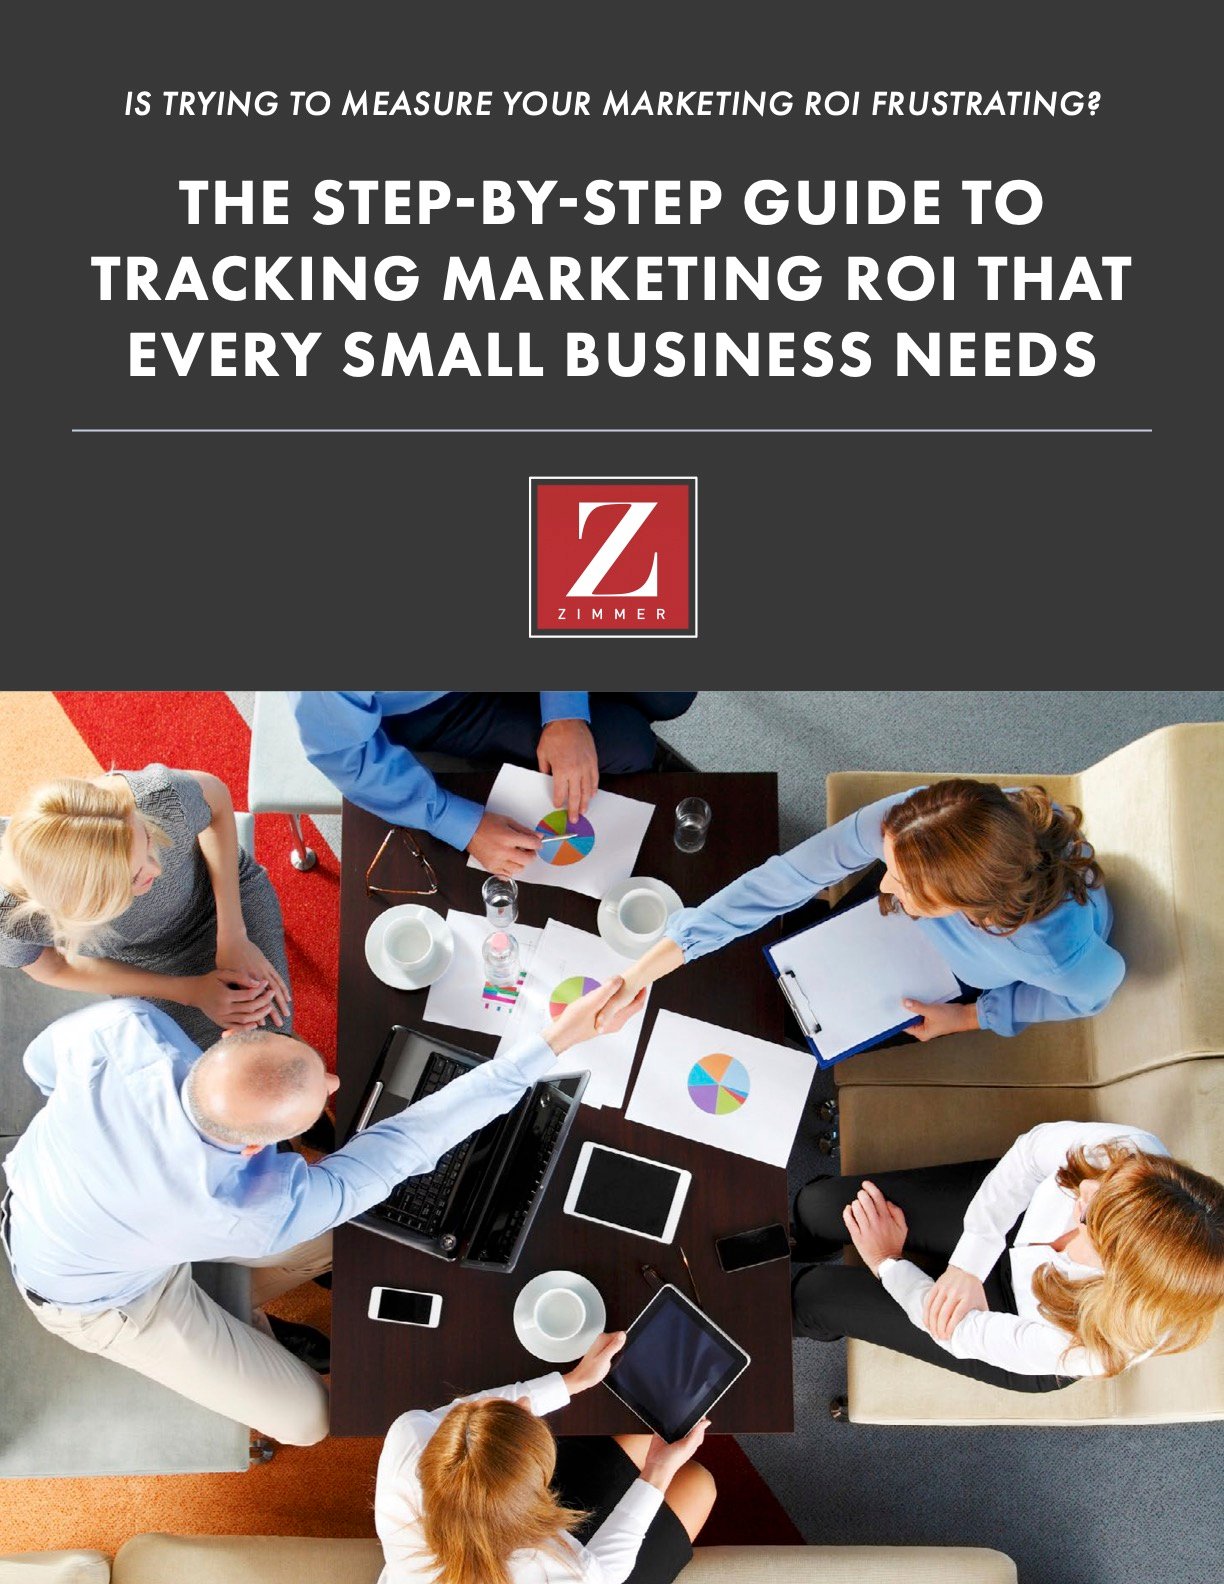 The Step-by-Step Guide to Tracking Marketing ROI that Every Small Business Needs